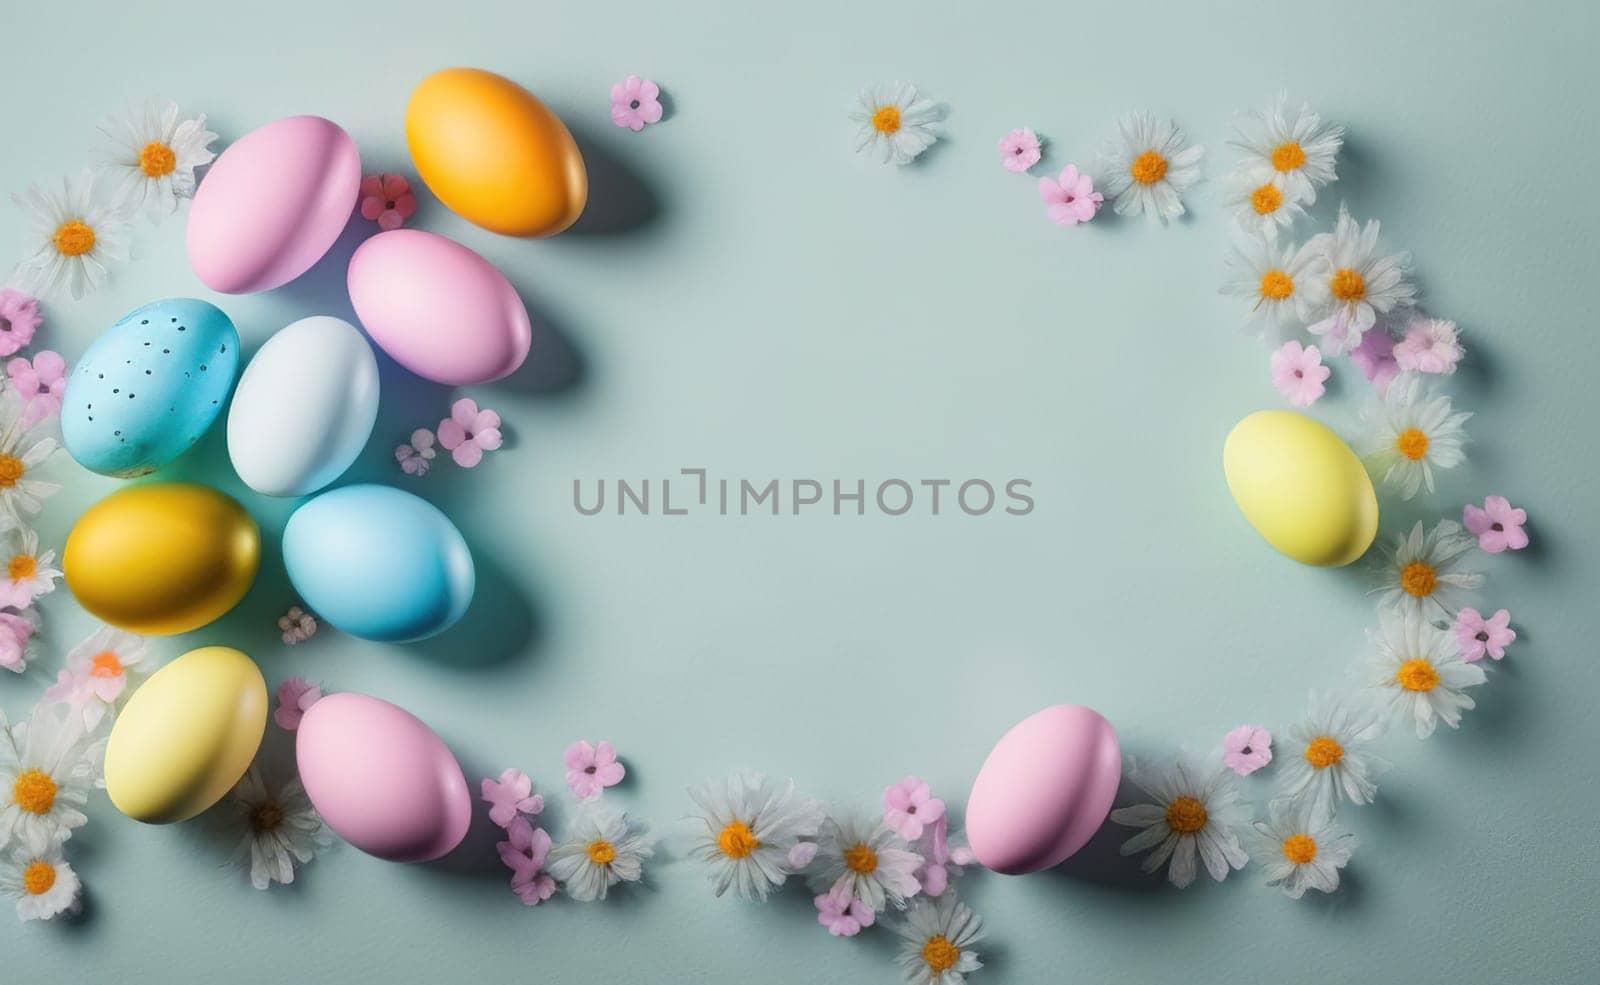 Happy easter background with flowers and eggs lined with a frame for text by EkaterinaPereslavtseva